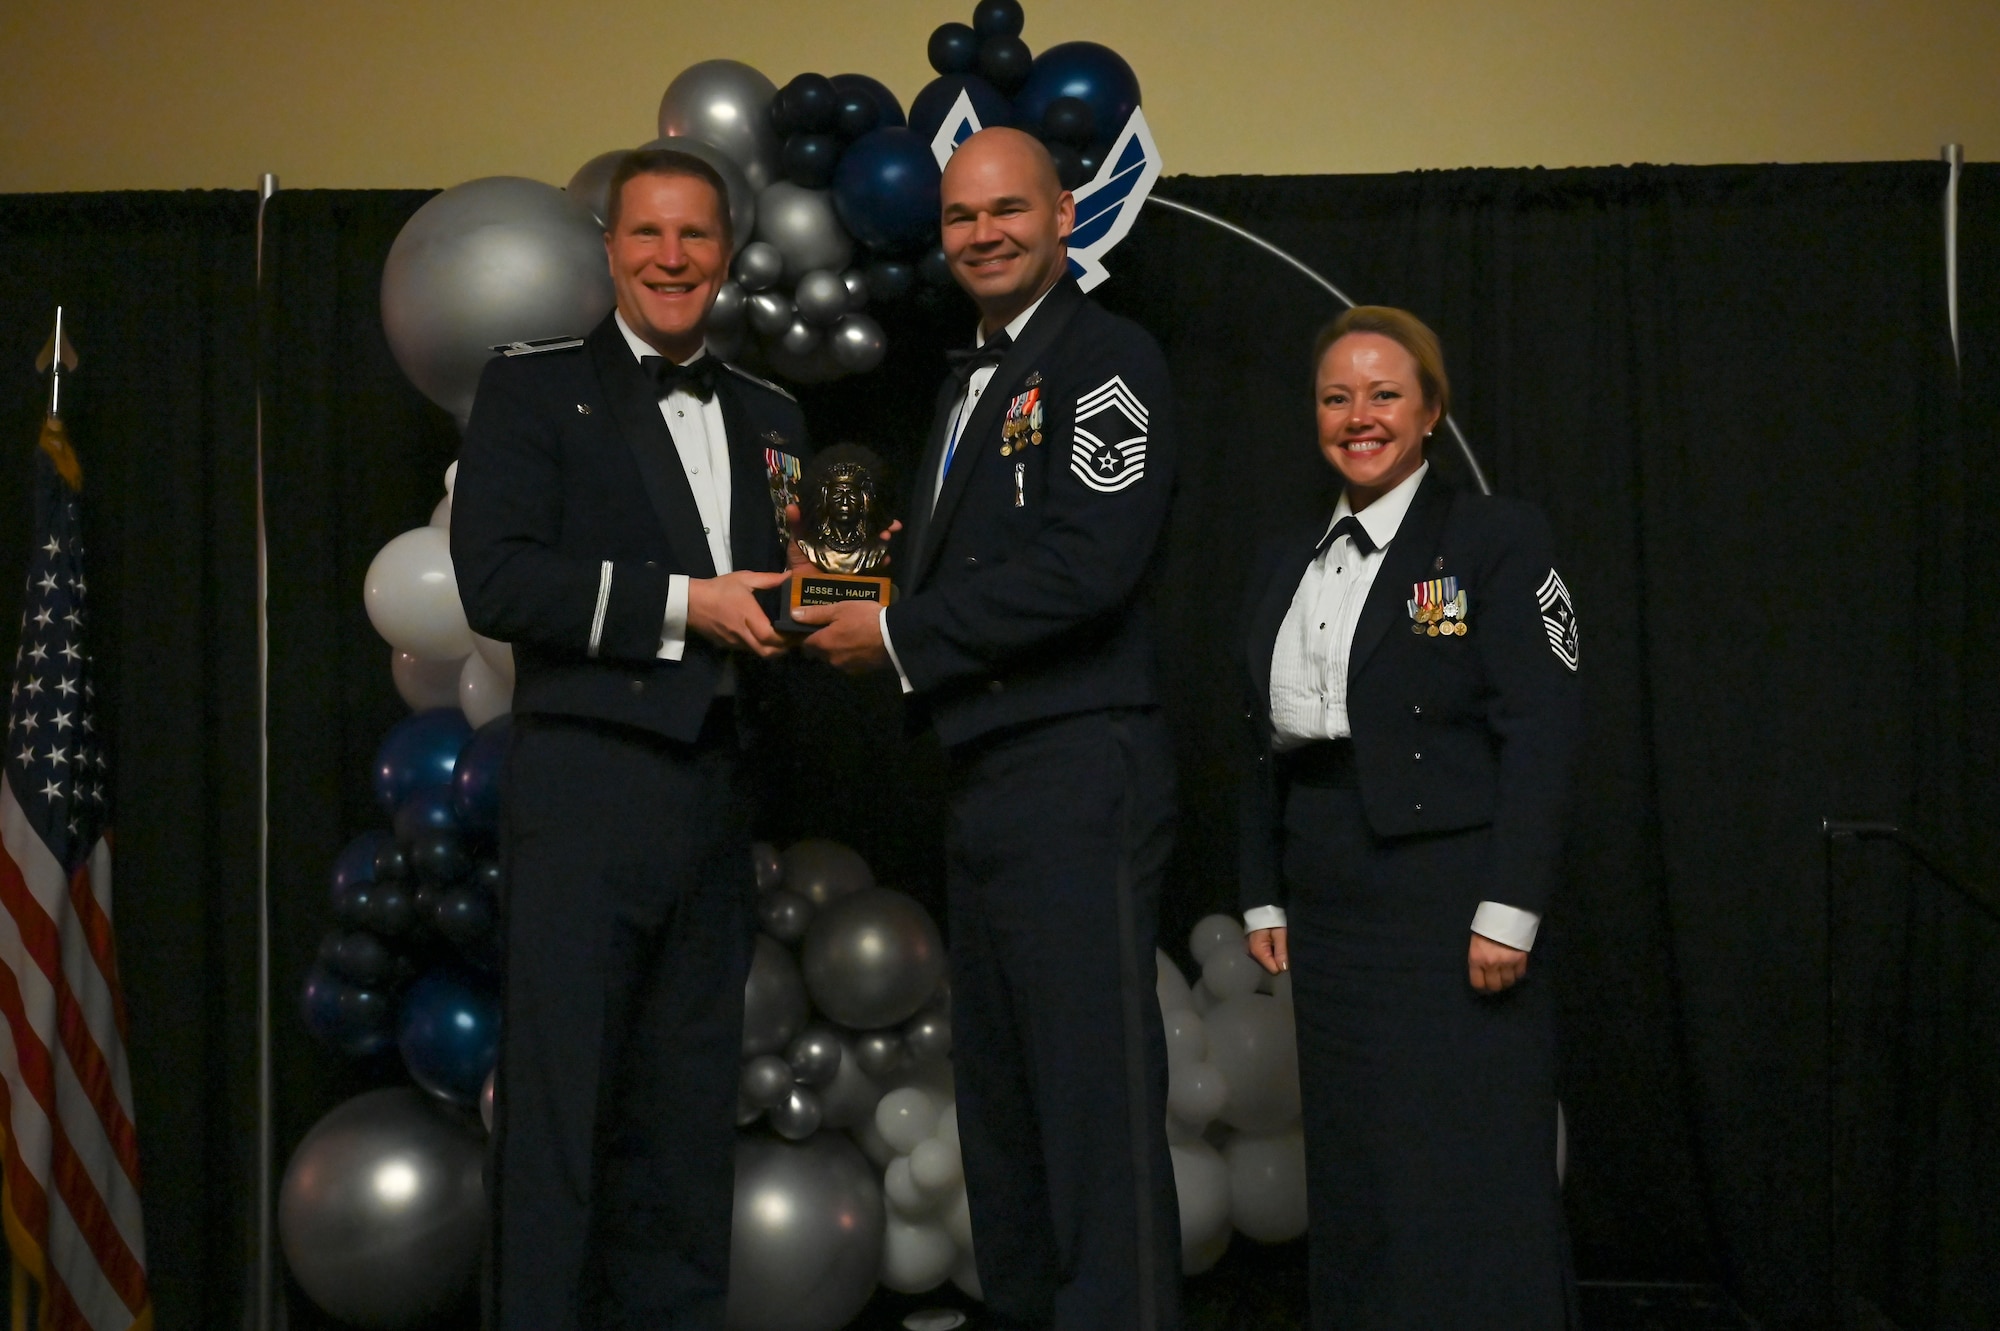 Chief Master Sgt. Jesse Haupt (center), 419th Maintenance Squadron, poses with Col. Matthew Fritz (left), 419th Fighter Wing commander, and Chief Master Sgt. Heather Richins, 419th FW command chief